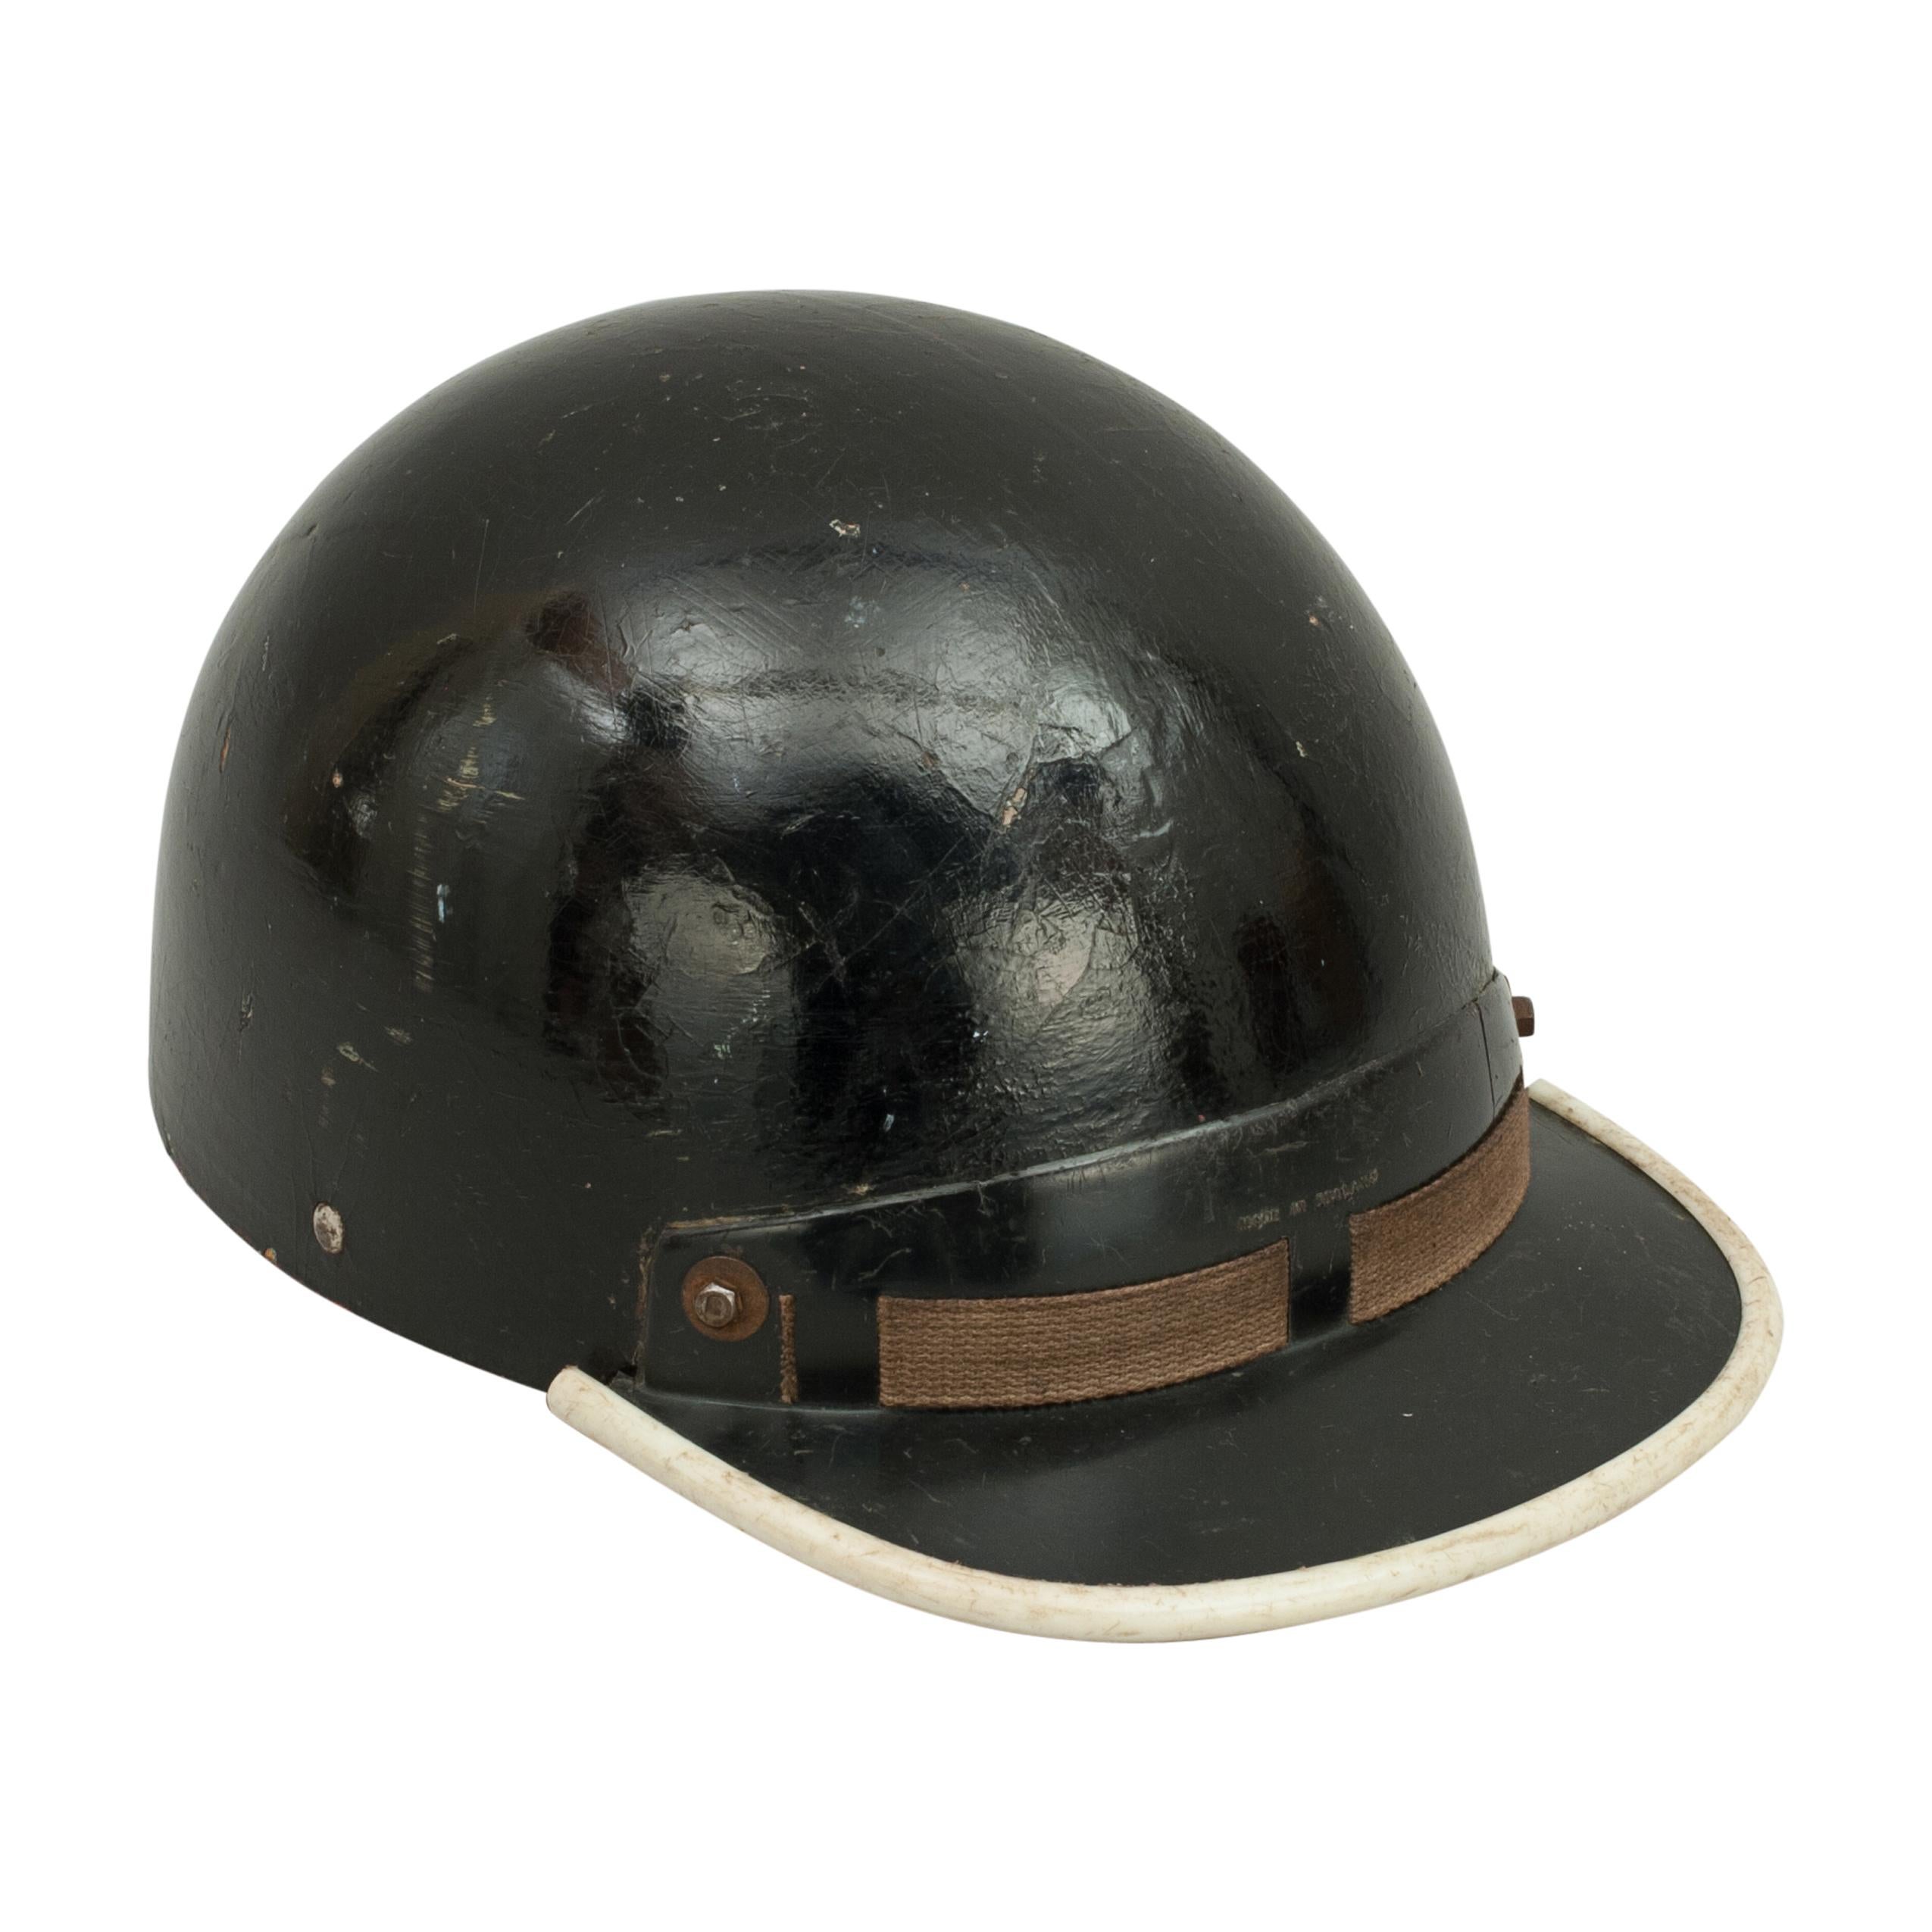 Vintage cromwell motoring helmet.
A good pudding basin motorcycle helmet with peak made in England by Cromwell. The outer shell is painted black with chips and scratches. The helmet interior is fitted with a material headband and webbing with